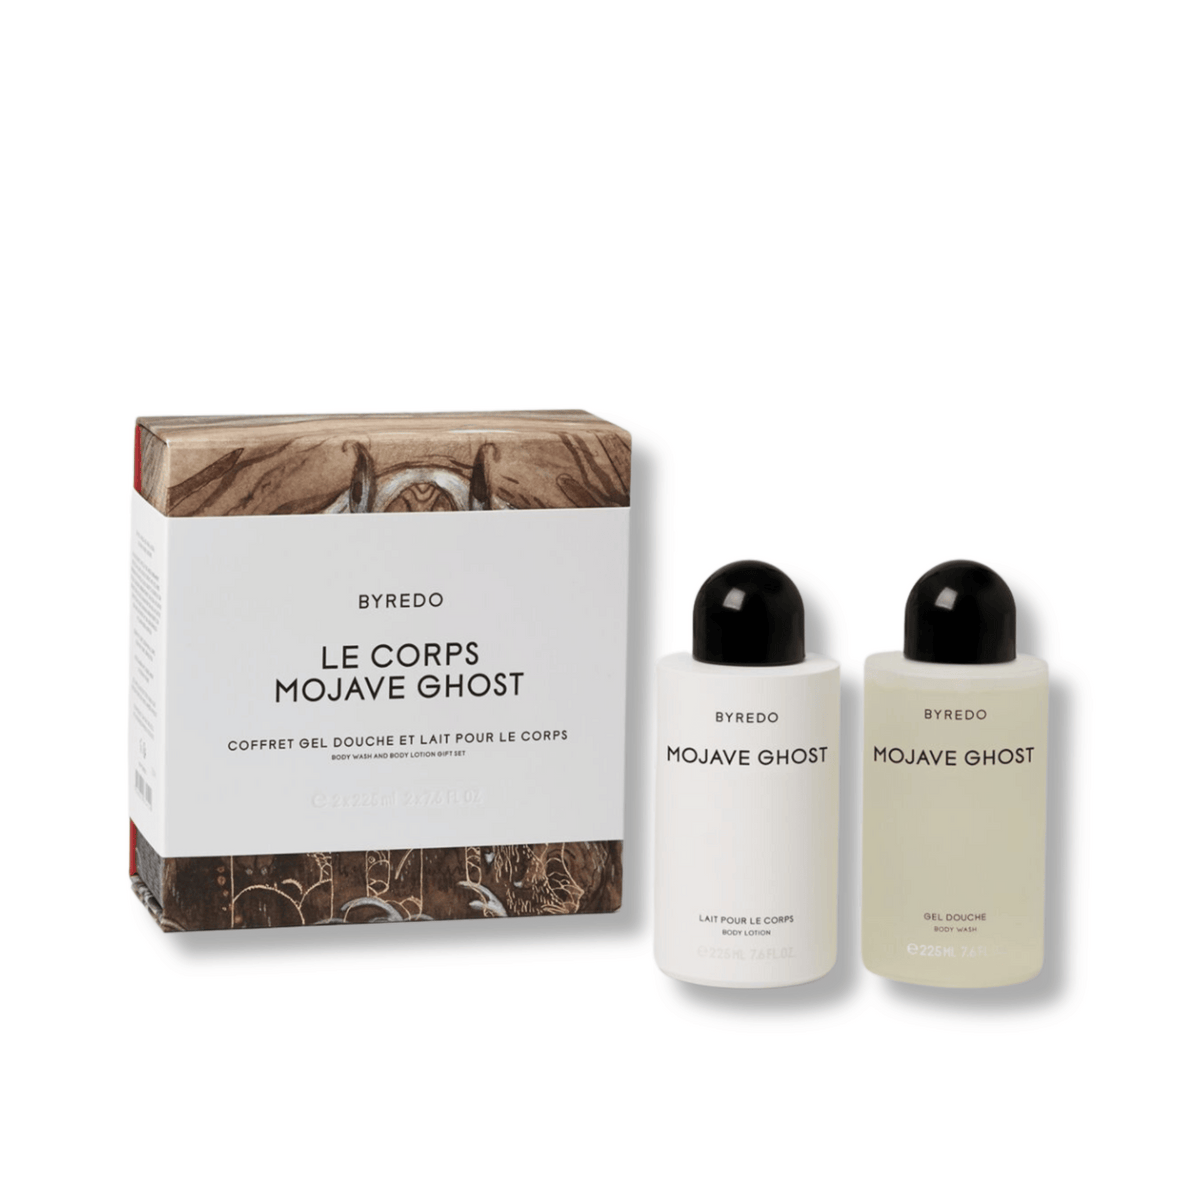 Primary Image of Body Care Gift Set - Mojave Ghost